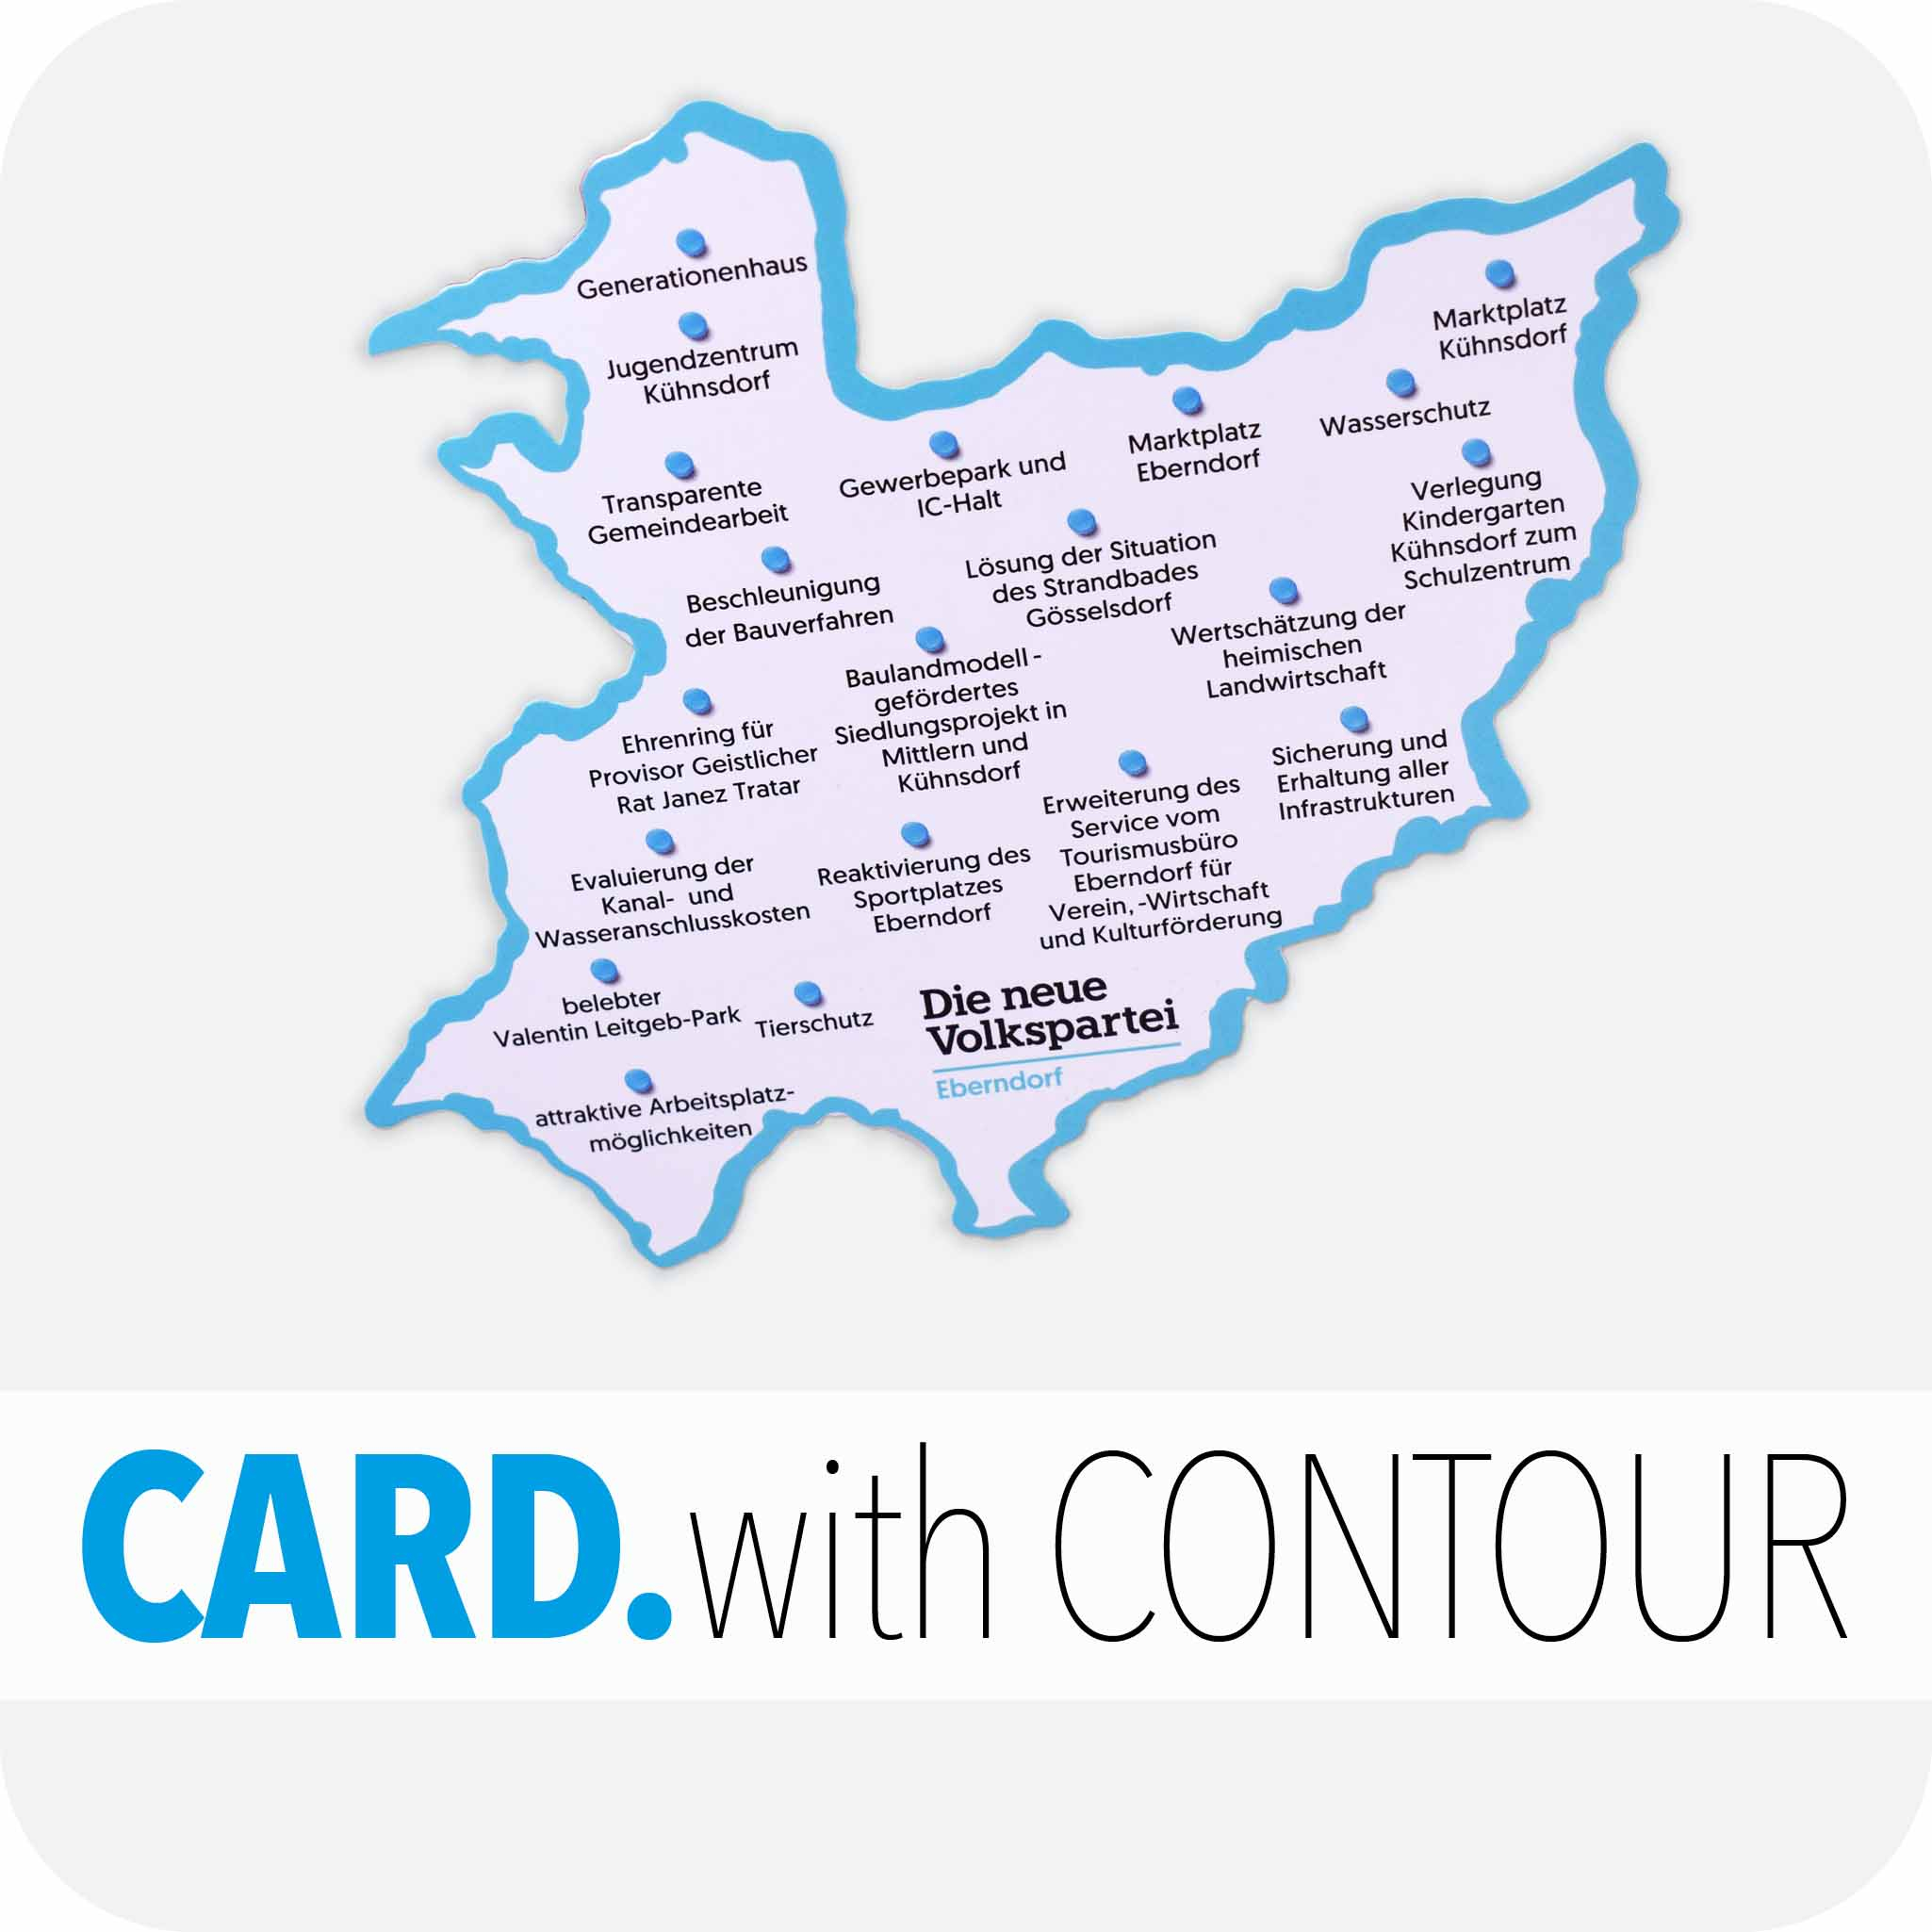 Card with contour